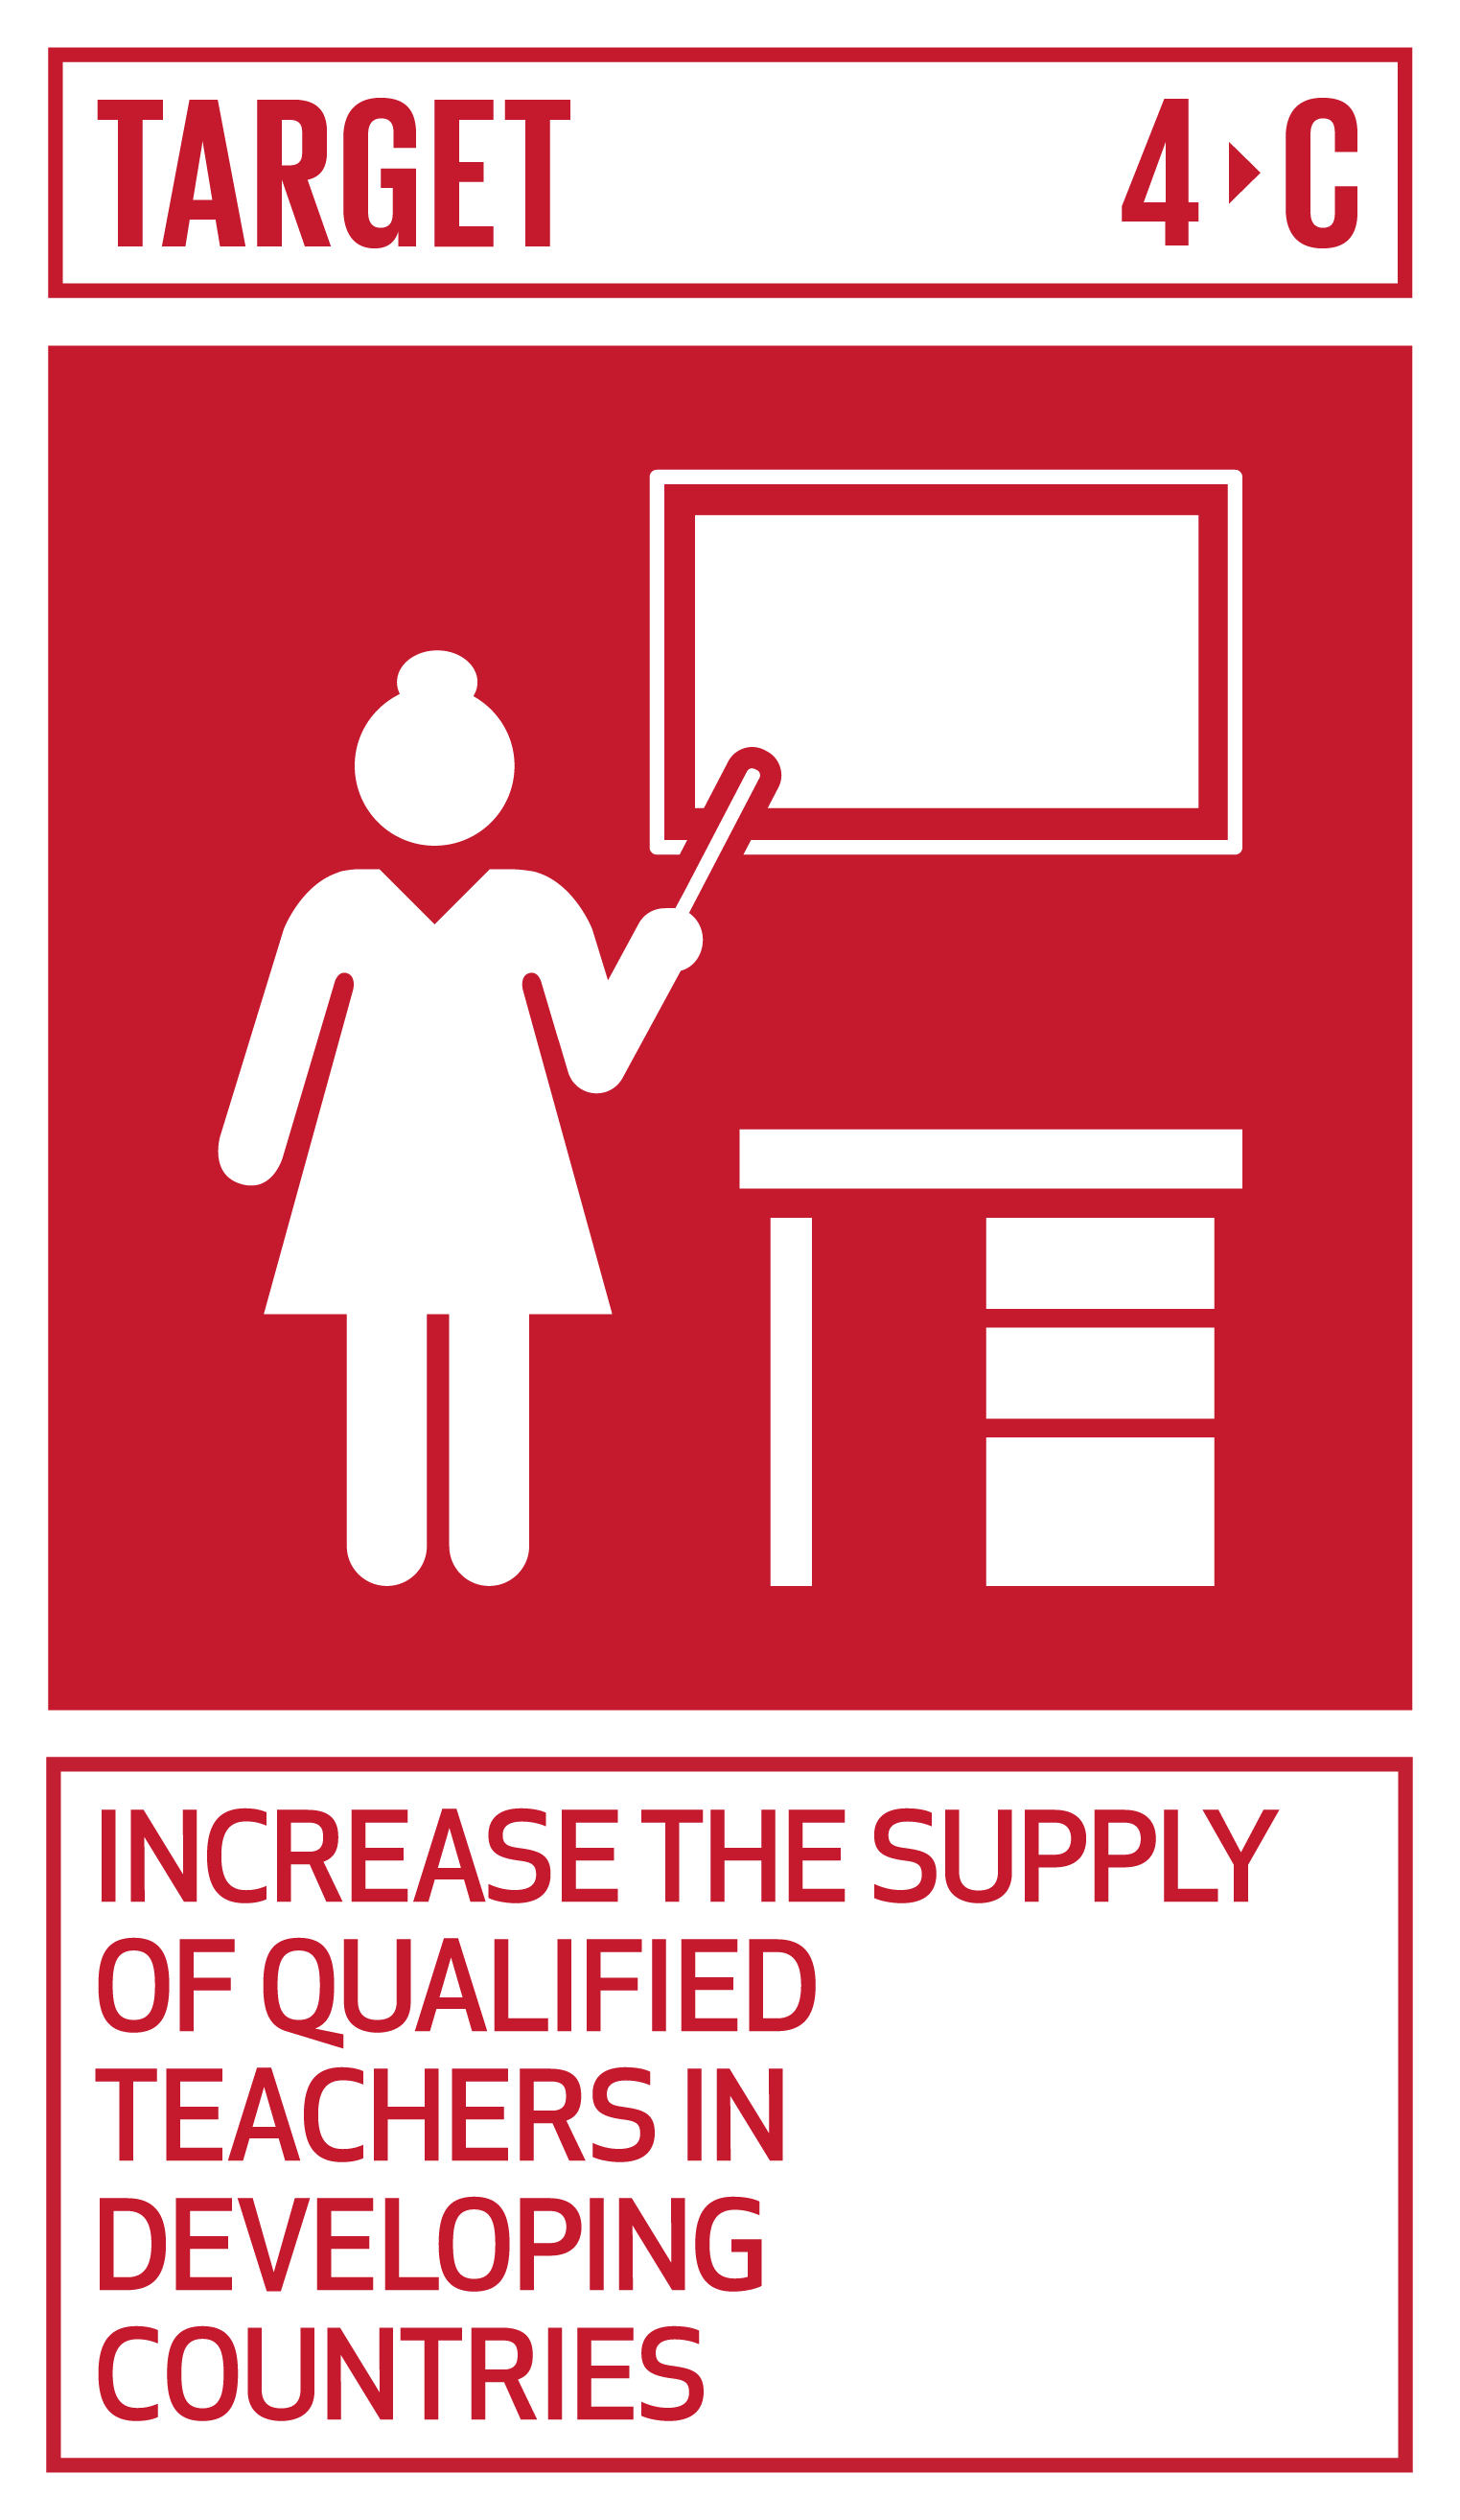 https://ocm.iccrom.org/sdgs/sdg-4-quality-education/sdg-4c-increase-supply-qualified-teachers-developing-countries